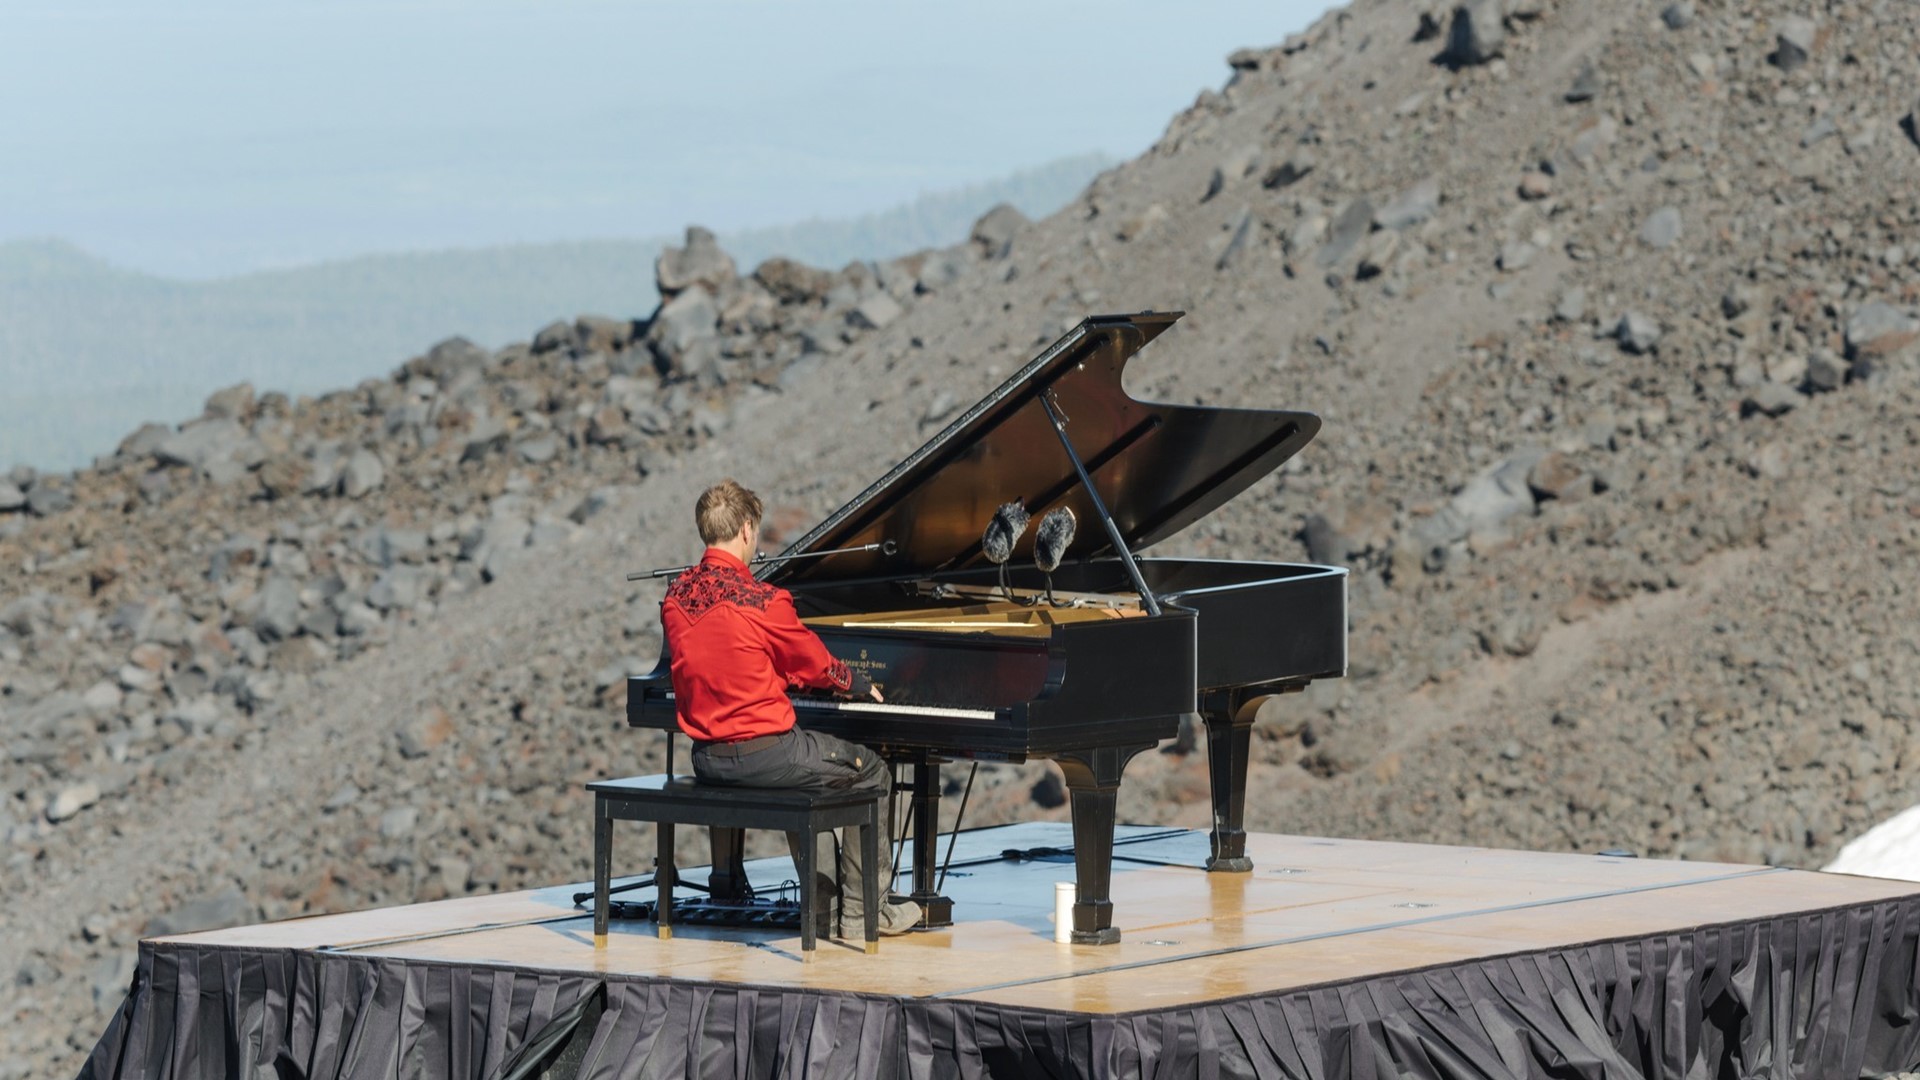 Hunter Noack brings his concert series to some of Oregon's most beautiful and isolated locations, encouraging others to come experience the synthesis.